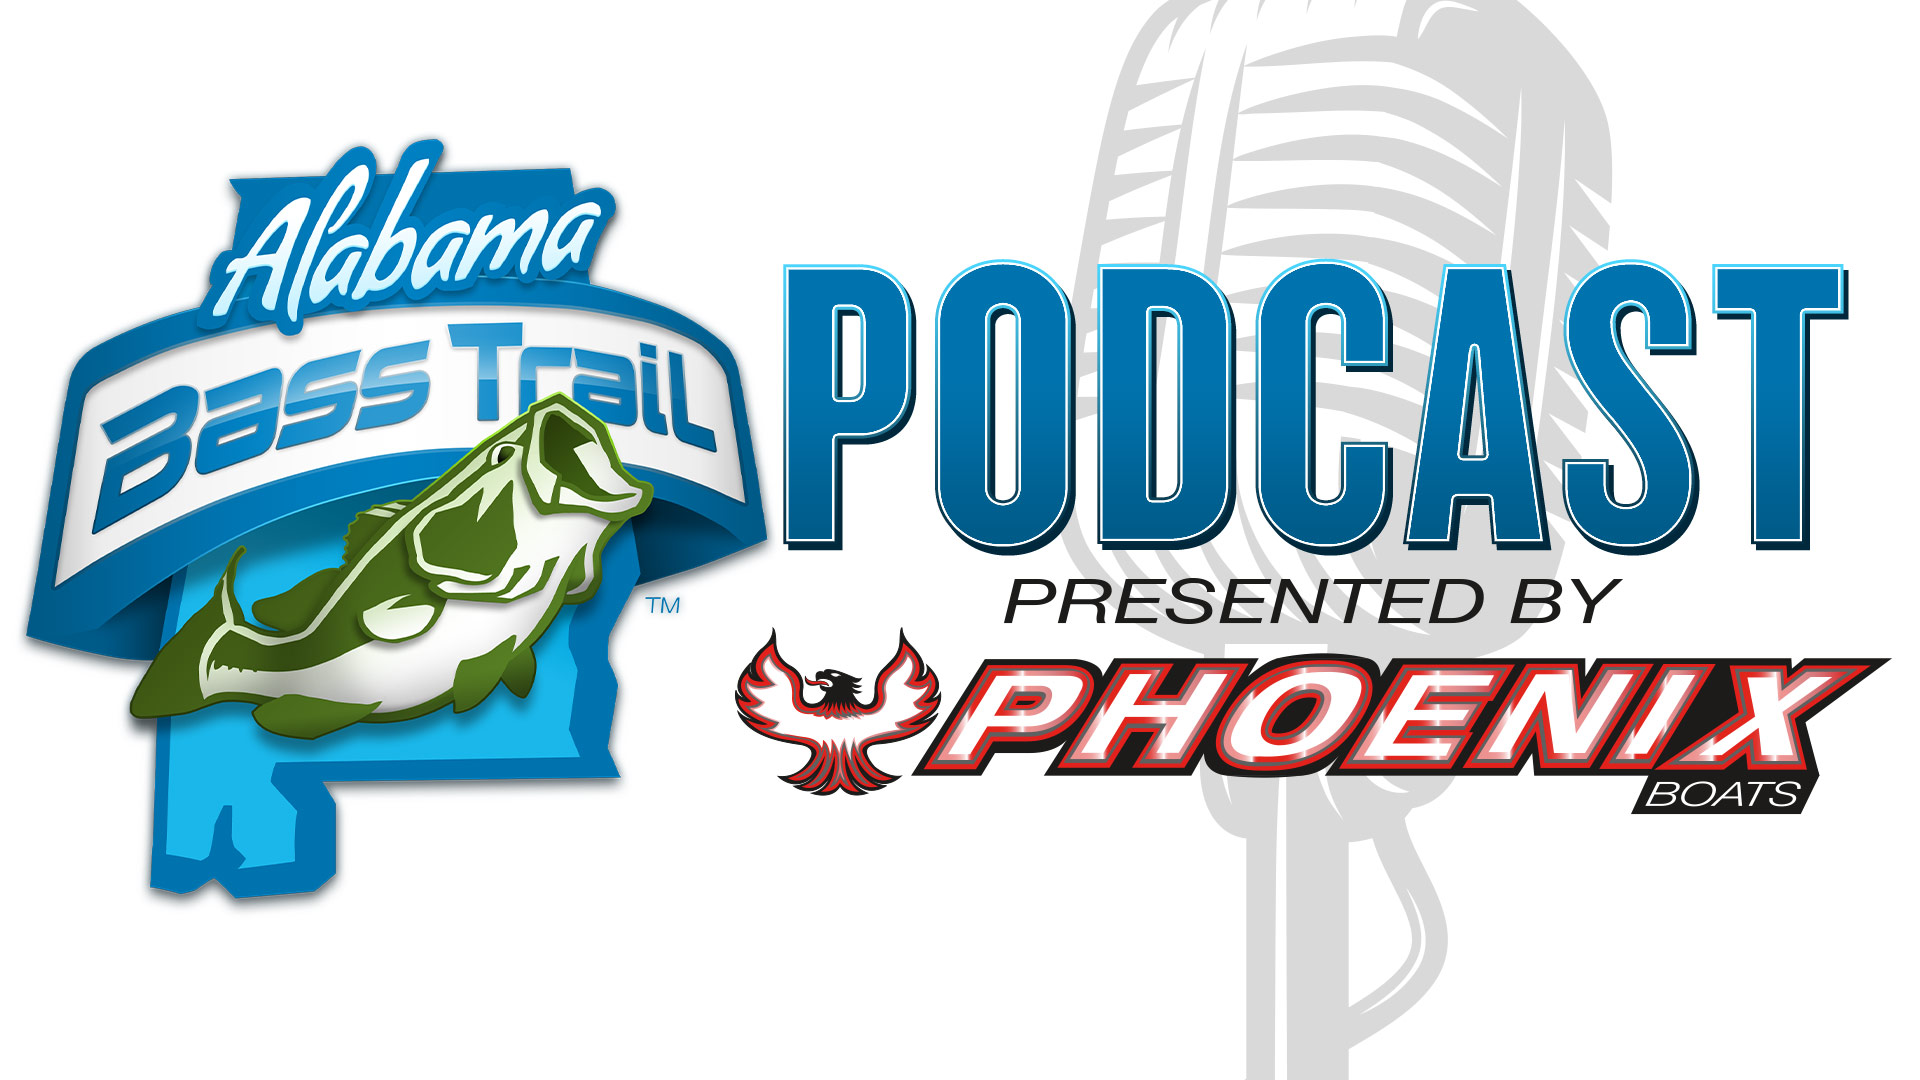 Alabama Bass Trail Podcast presented by Phoenix Boats